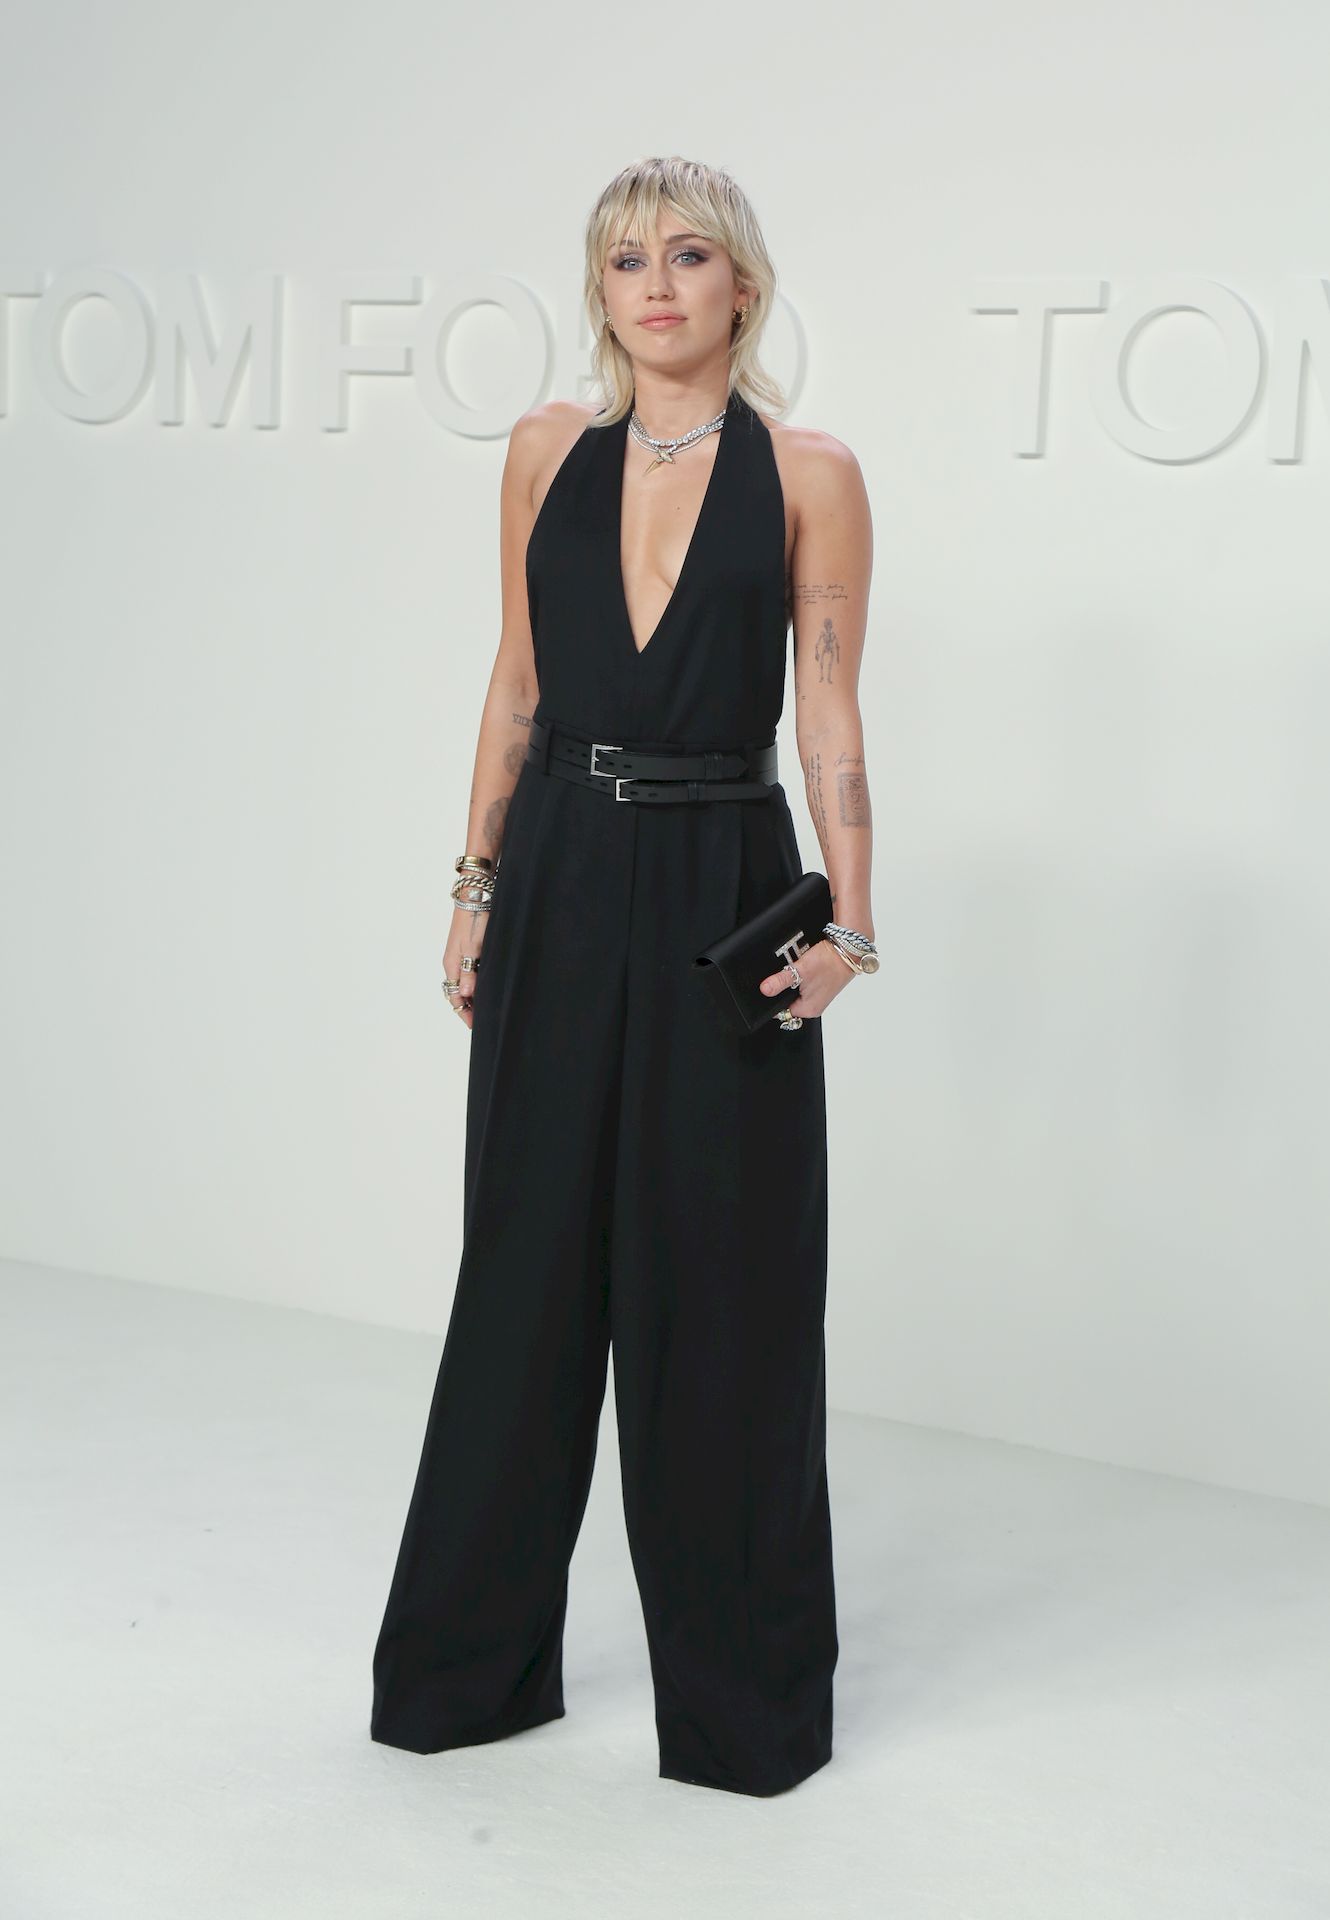 Miley-Cyrus-Looks-Sexy-at-the-Tom-Ford-Autumn_Winter-2020-Fashion-Show-0054.jpg